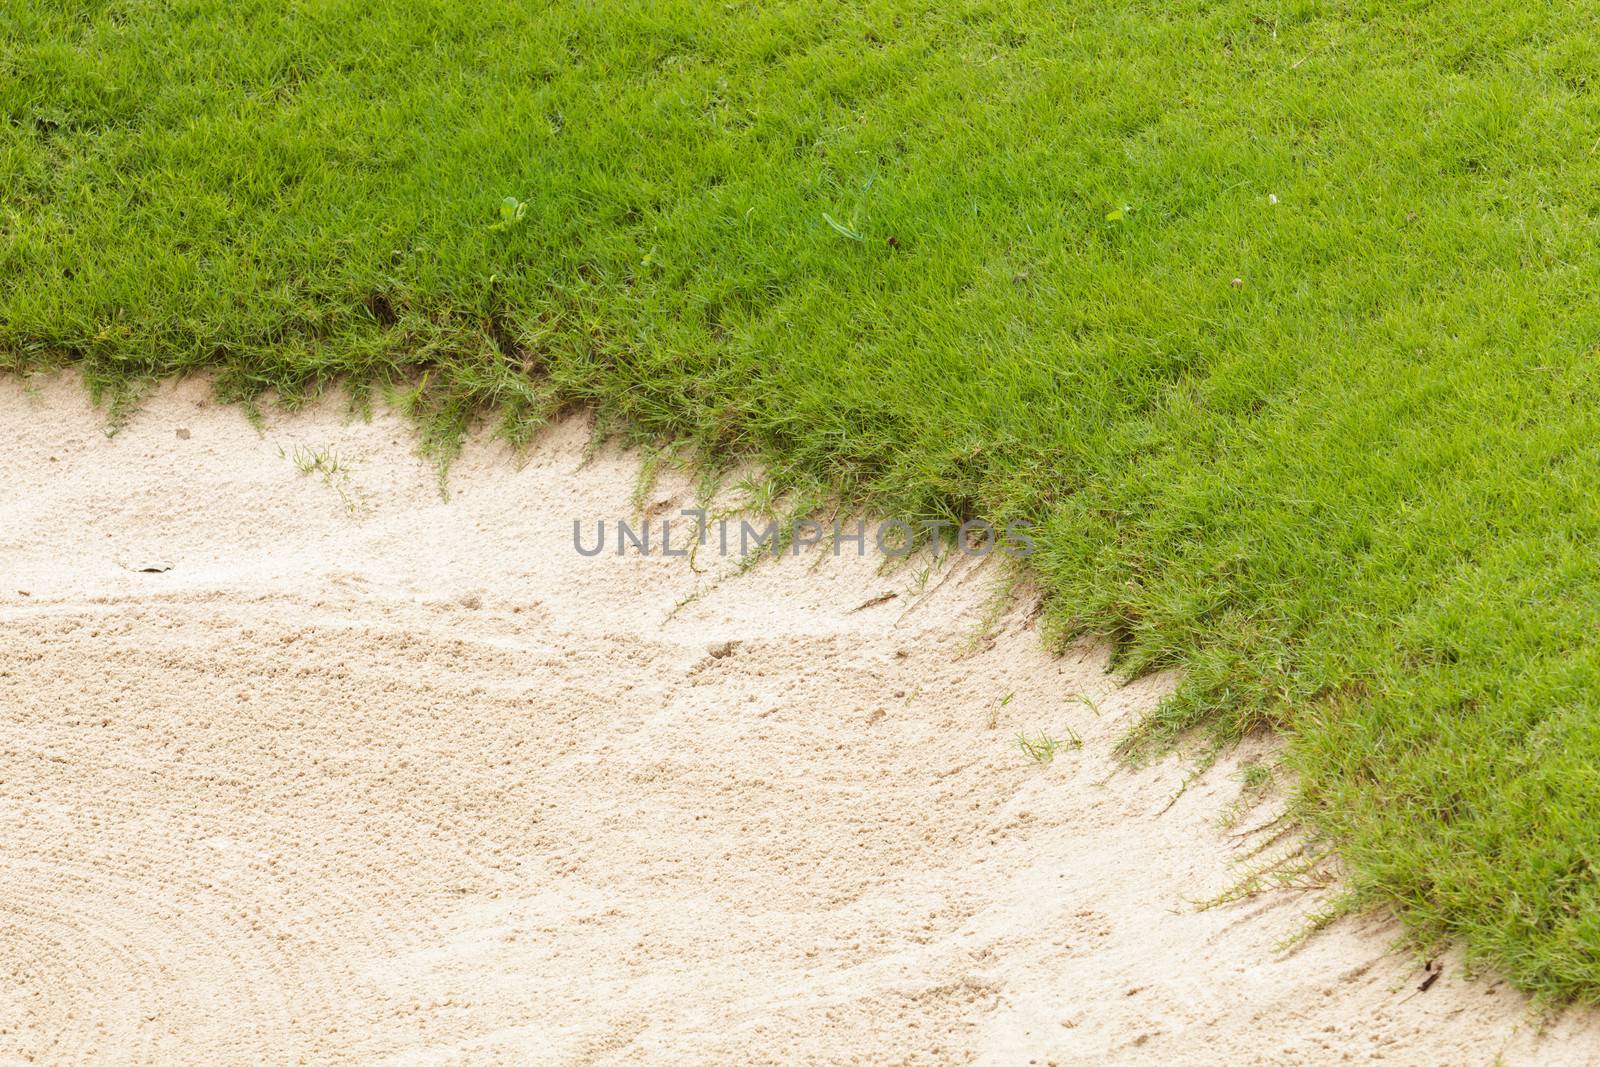 Golf sand trap on the green grass